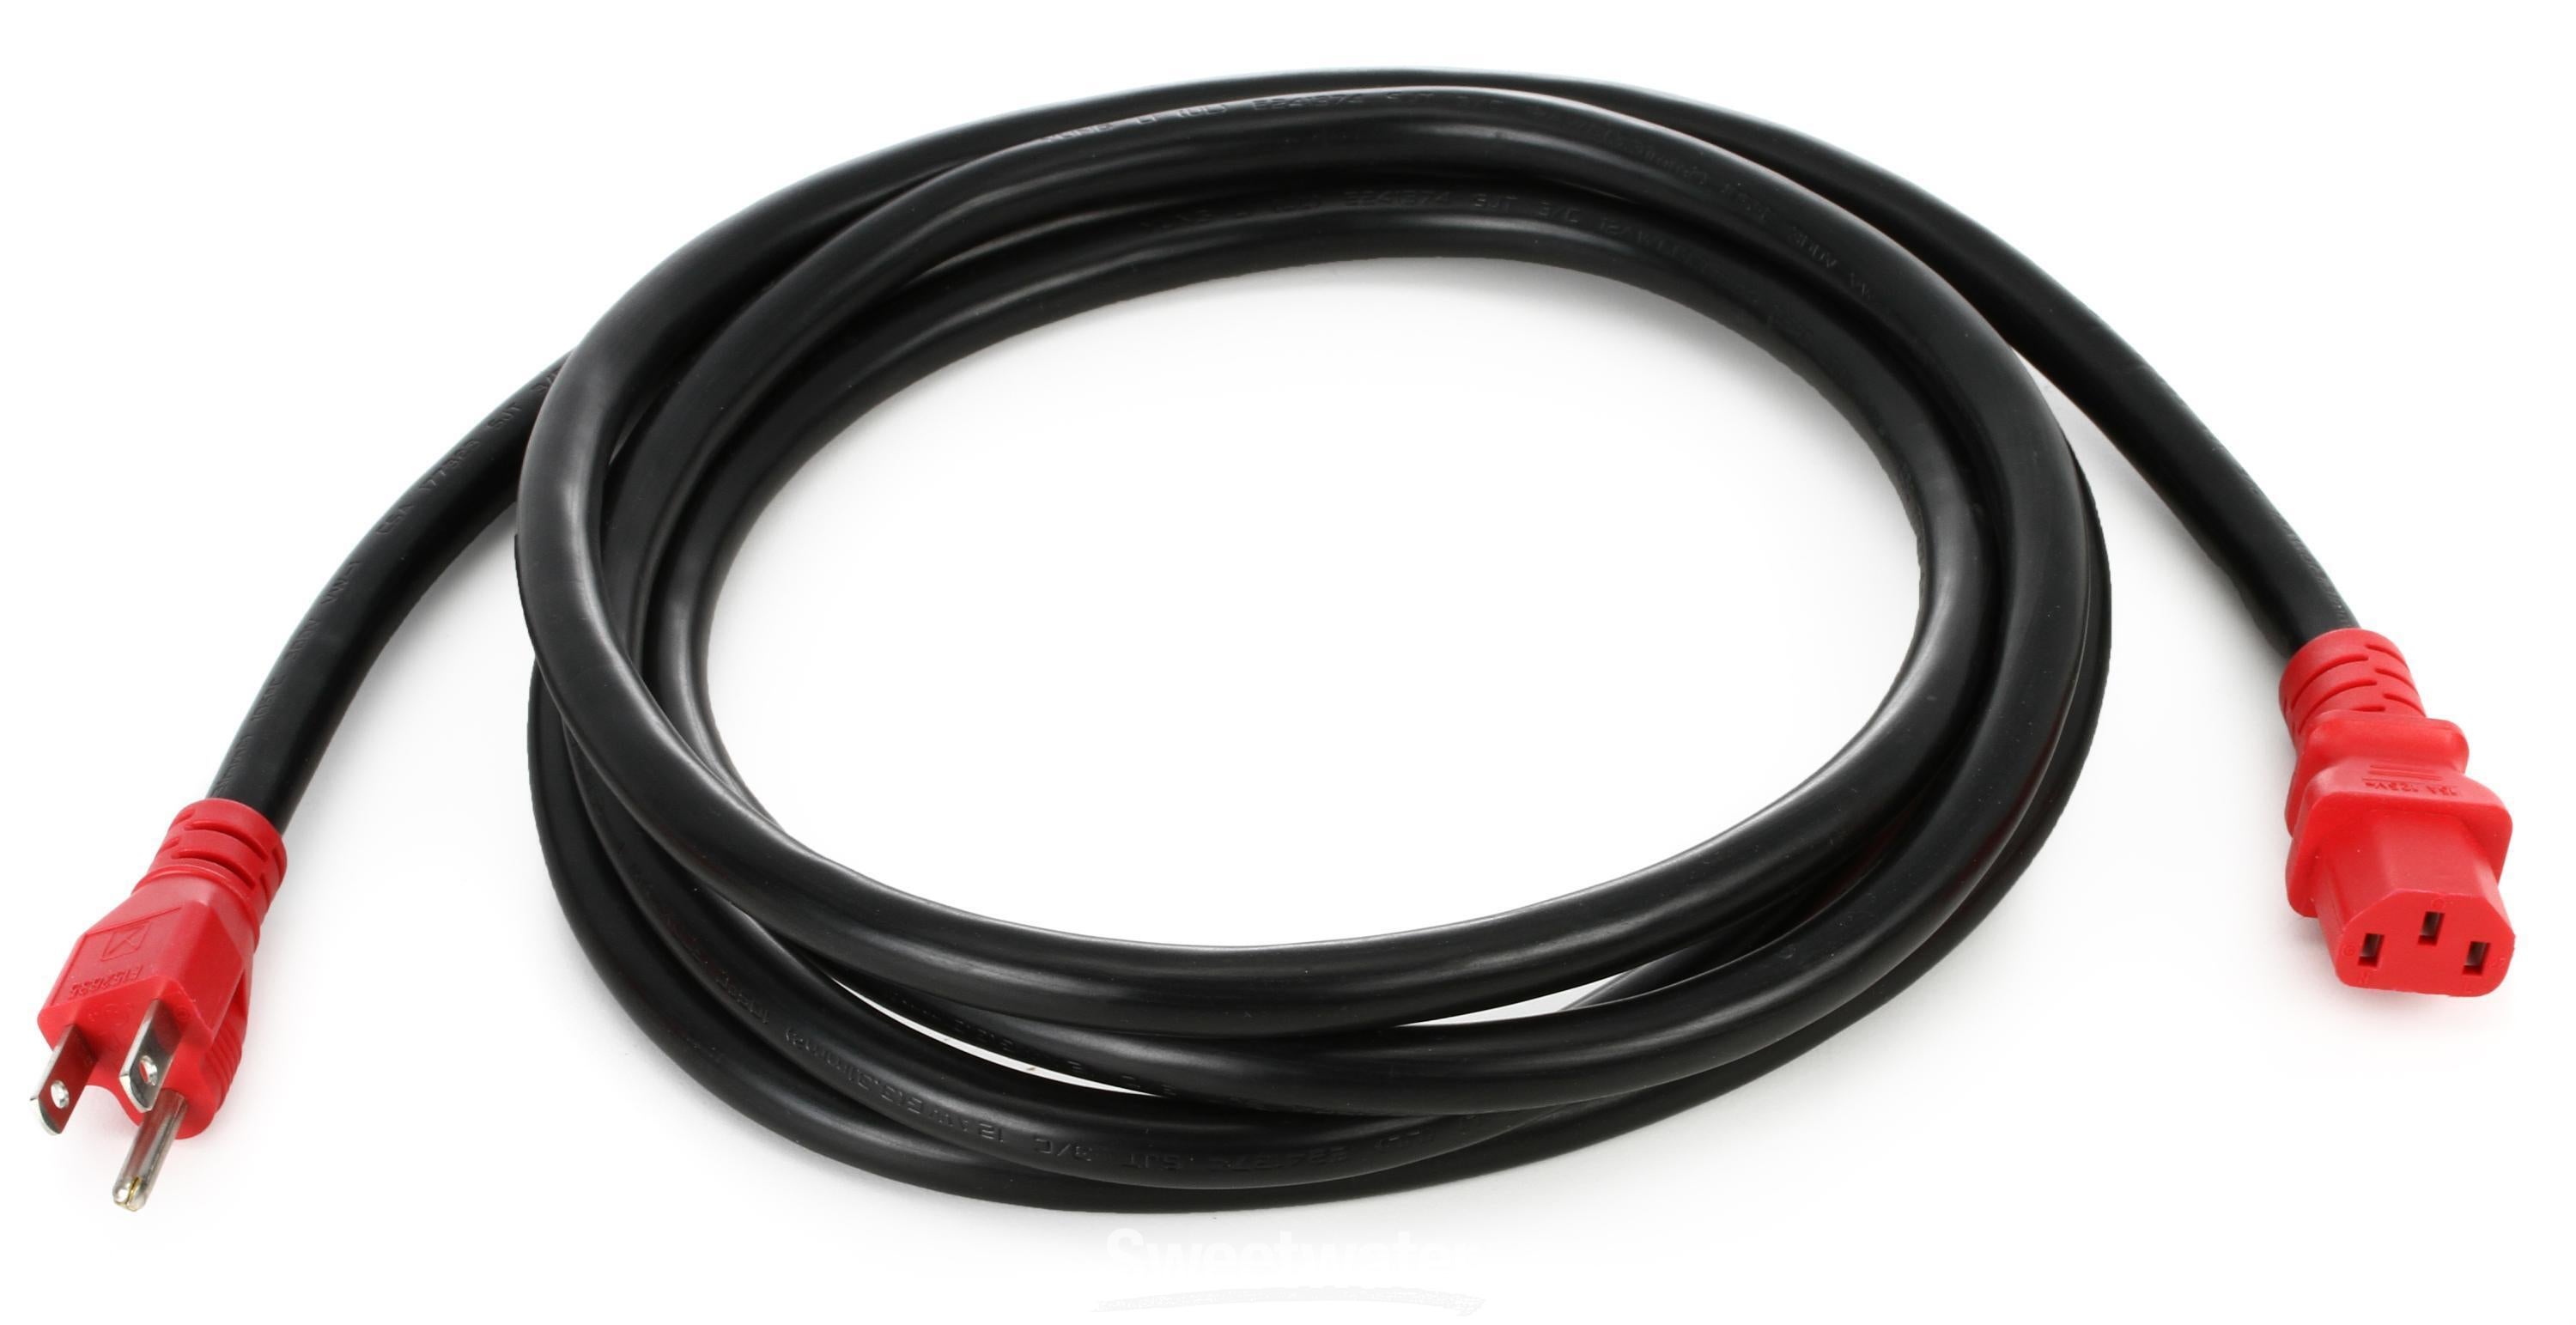 D'Addario PW-IECB-10 IEC Power Cable - 10 foot | Sweetwater